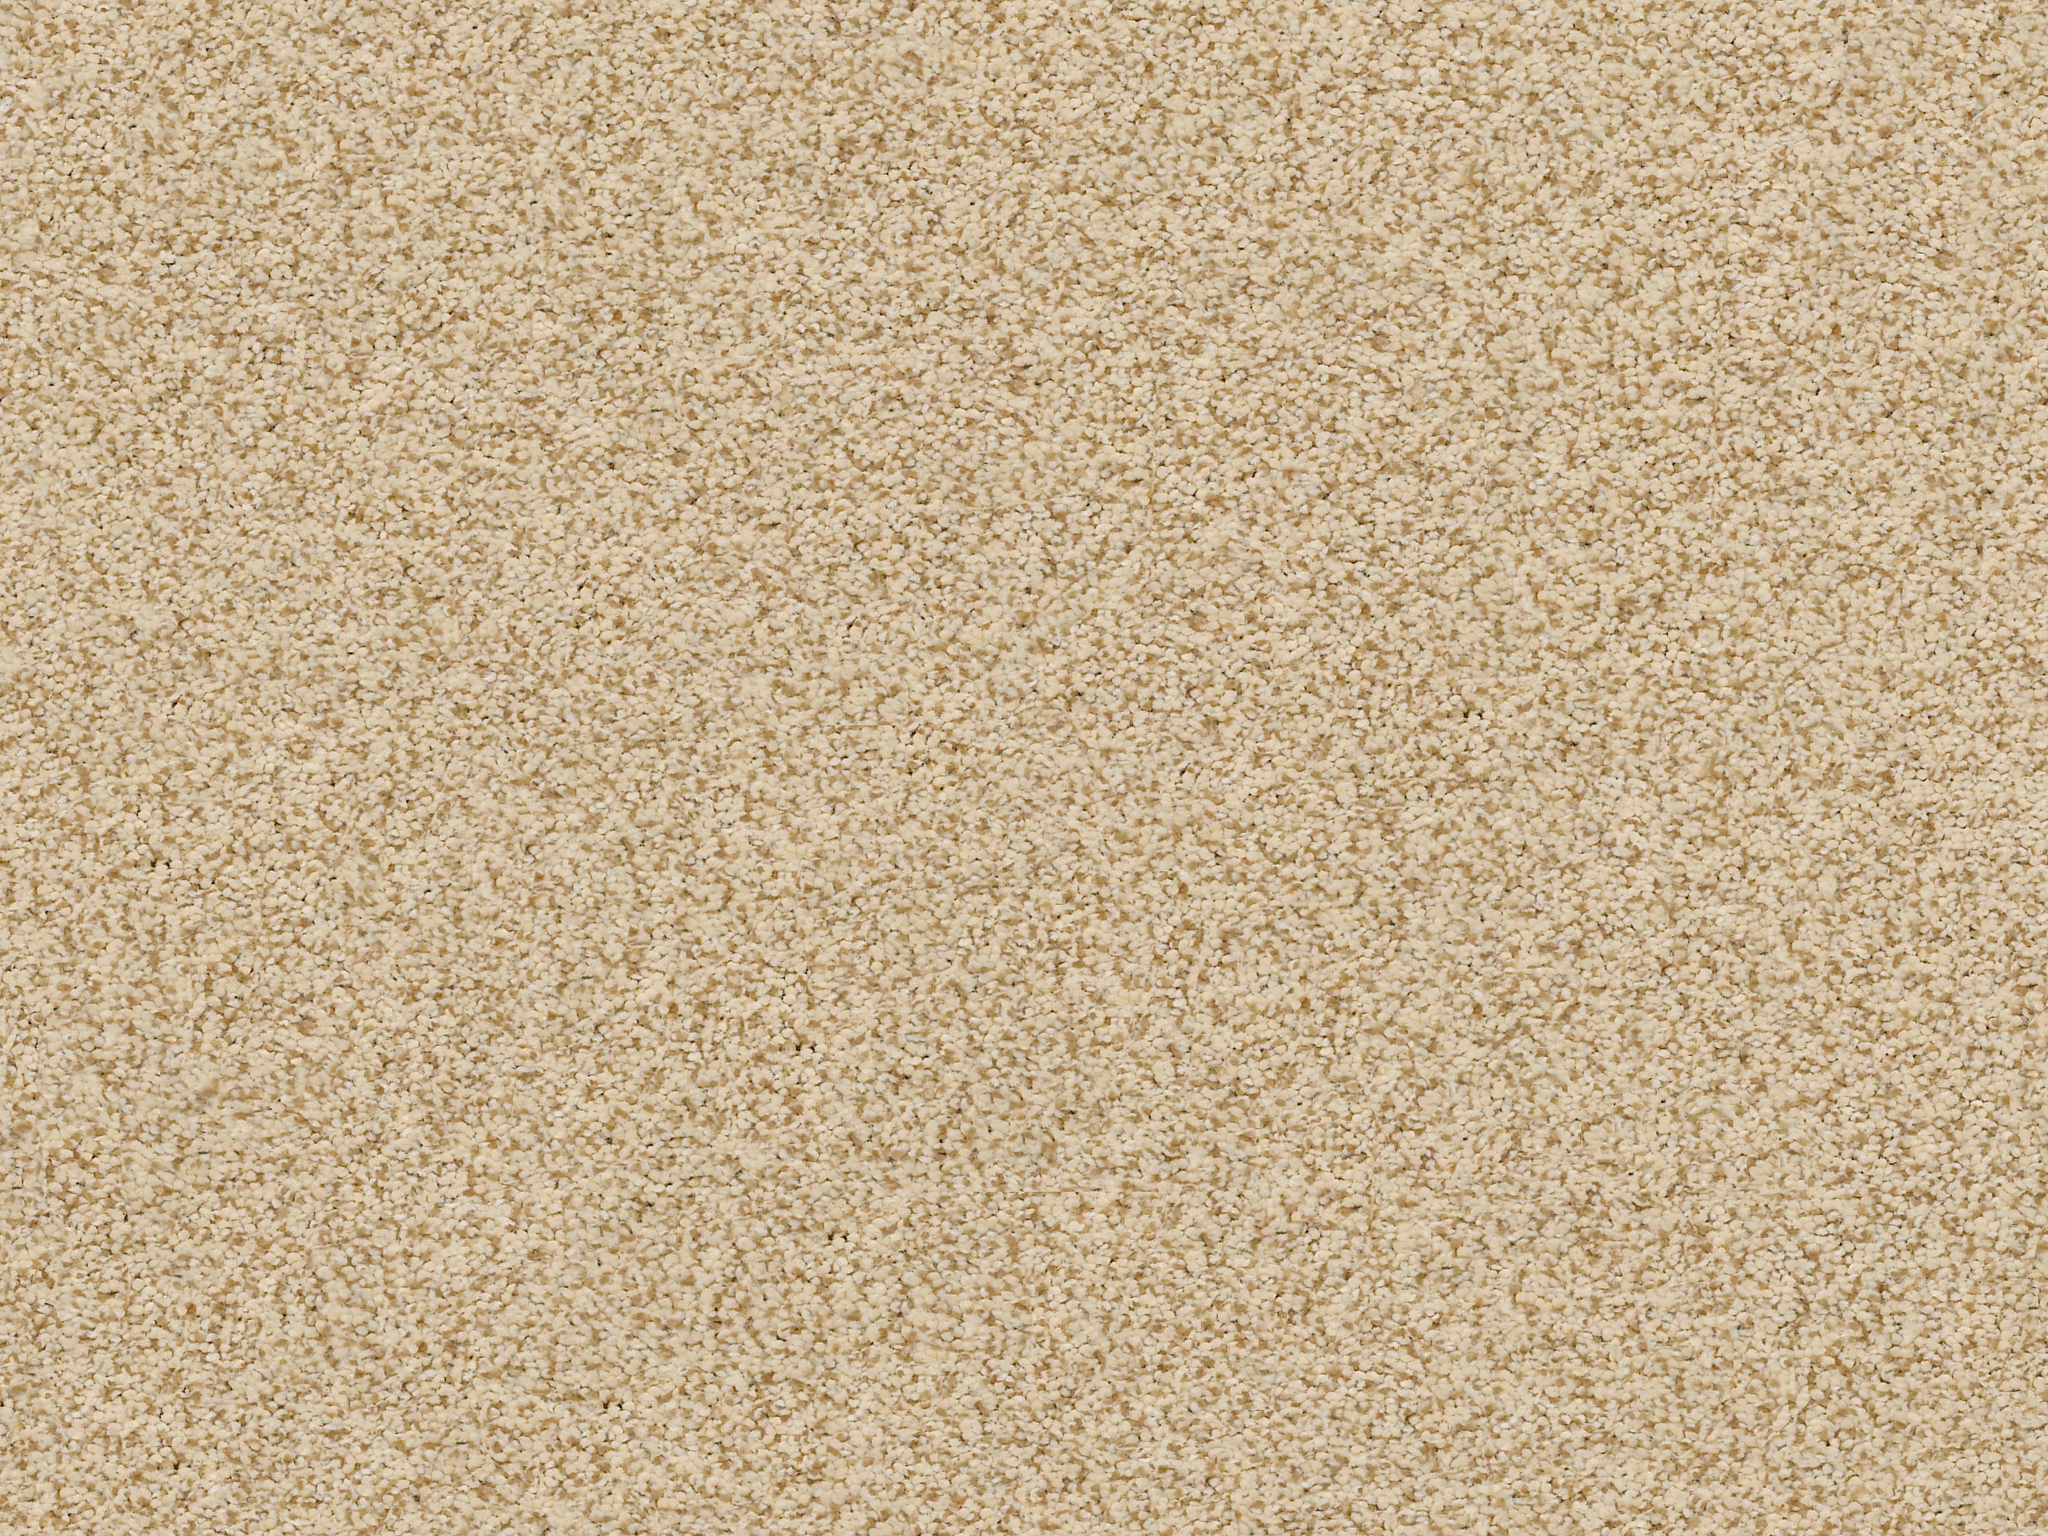 Serenity Cove Carpet - Golden Zoomed Swatch Thumbnail